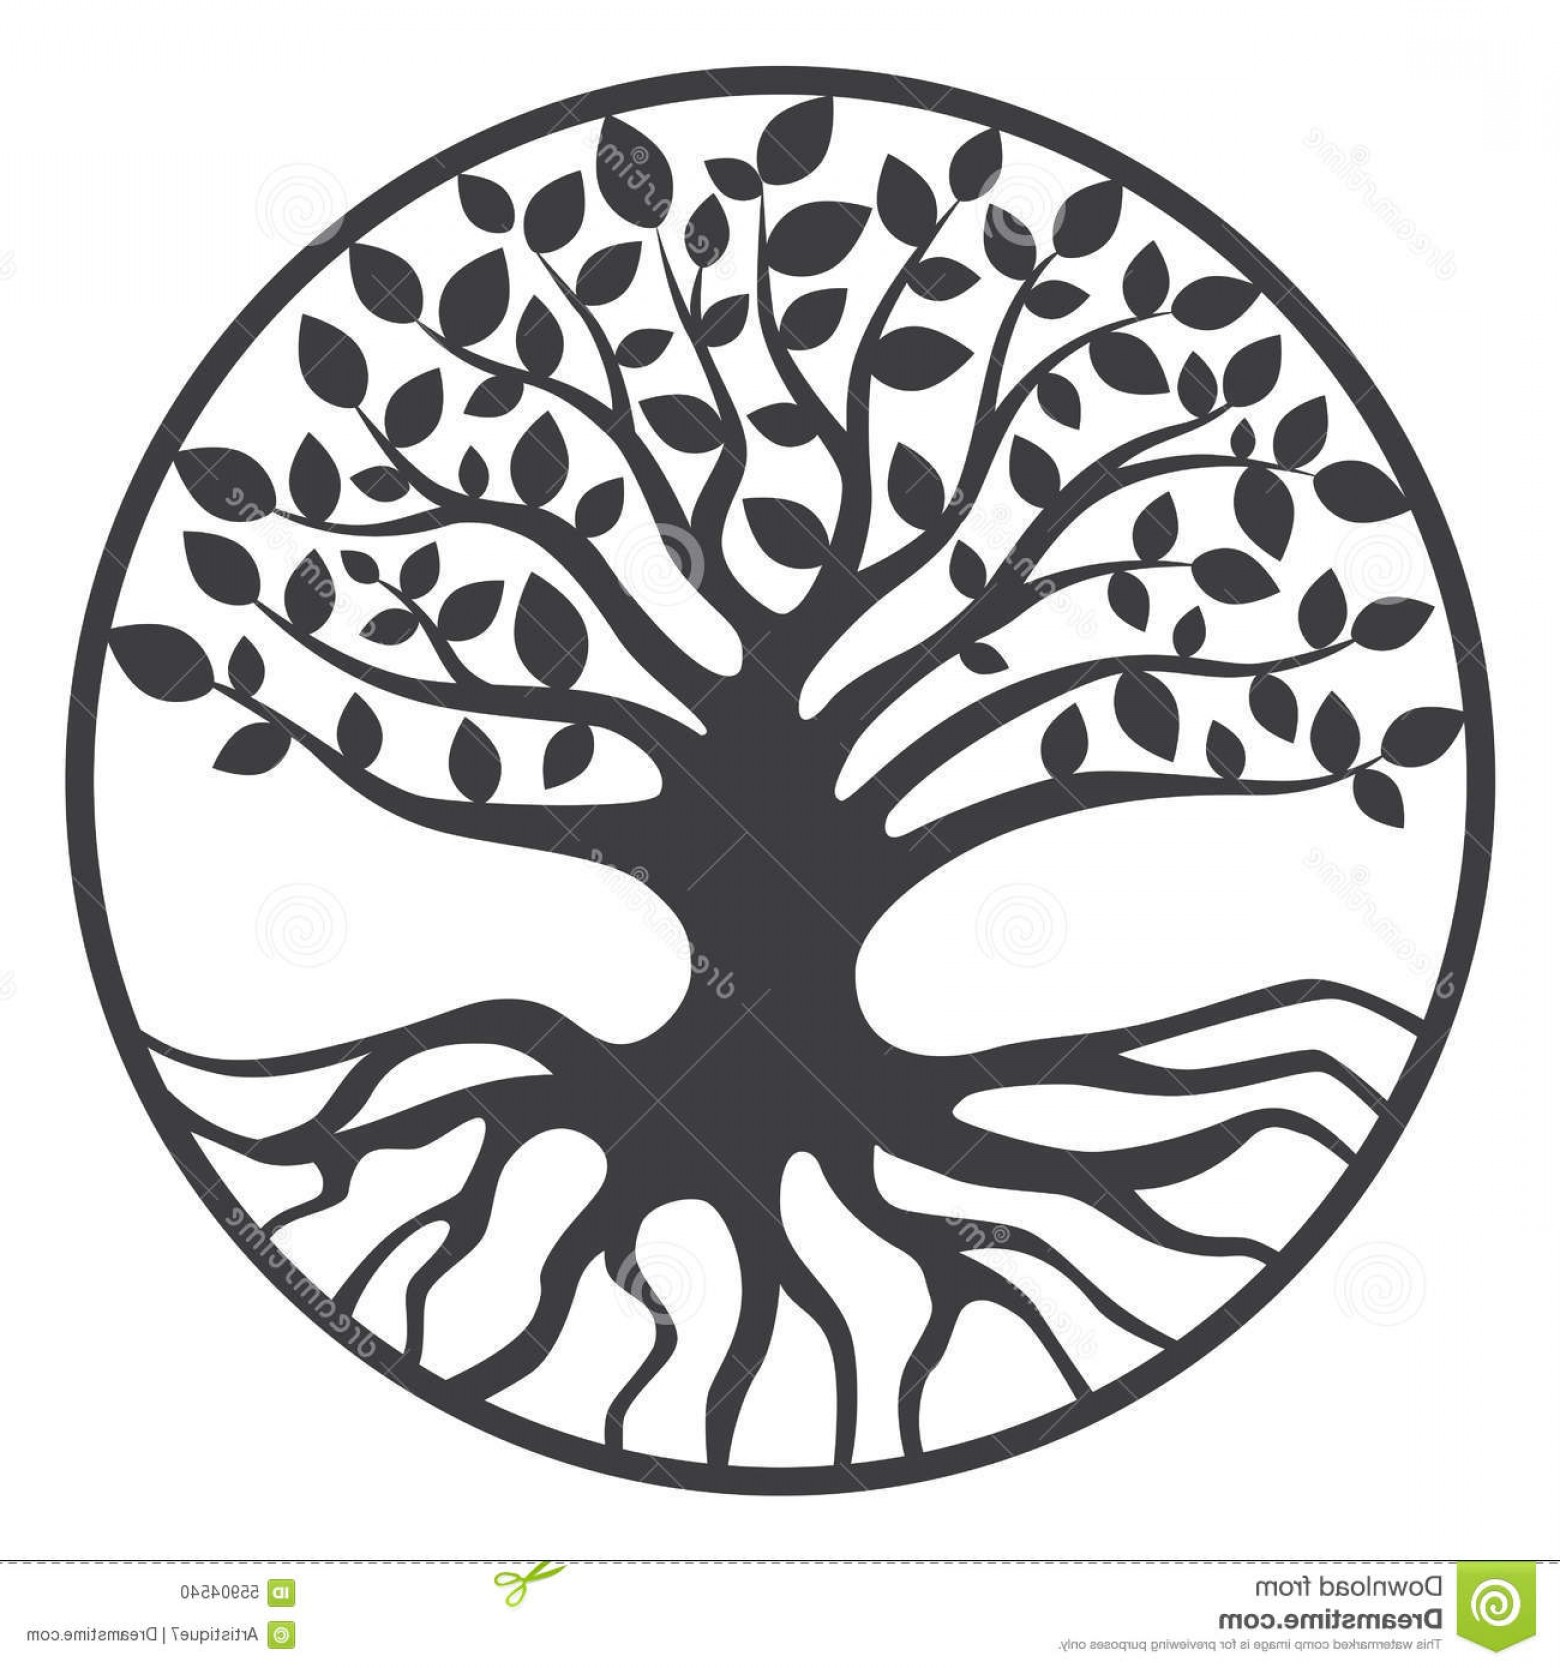 Tree Of Life Vector Free at GetDrawings Free download